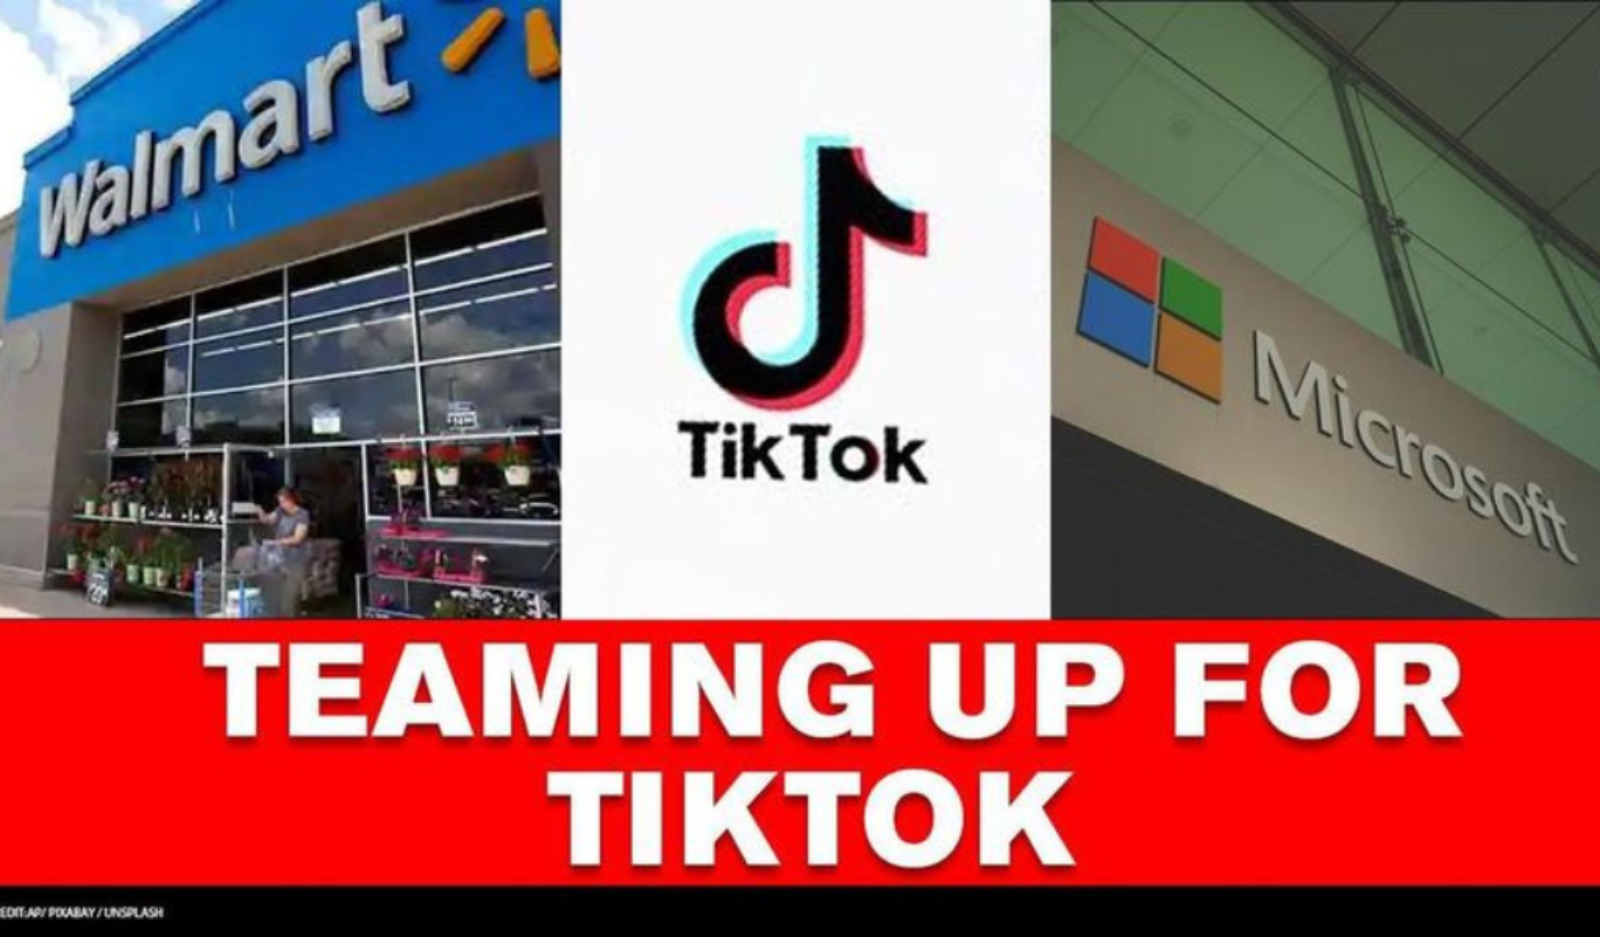 Walmart and Microsoft Join Hands To Bid For TikTok, Fighting Against A Common Enemy: Amazon.